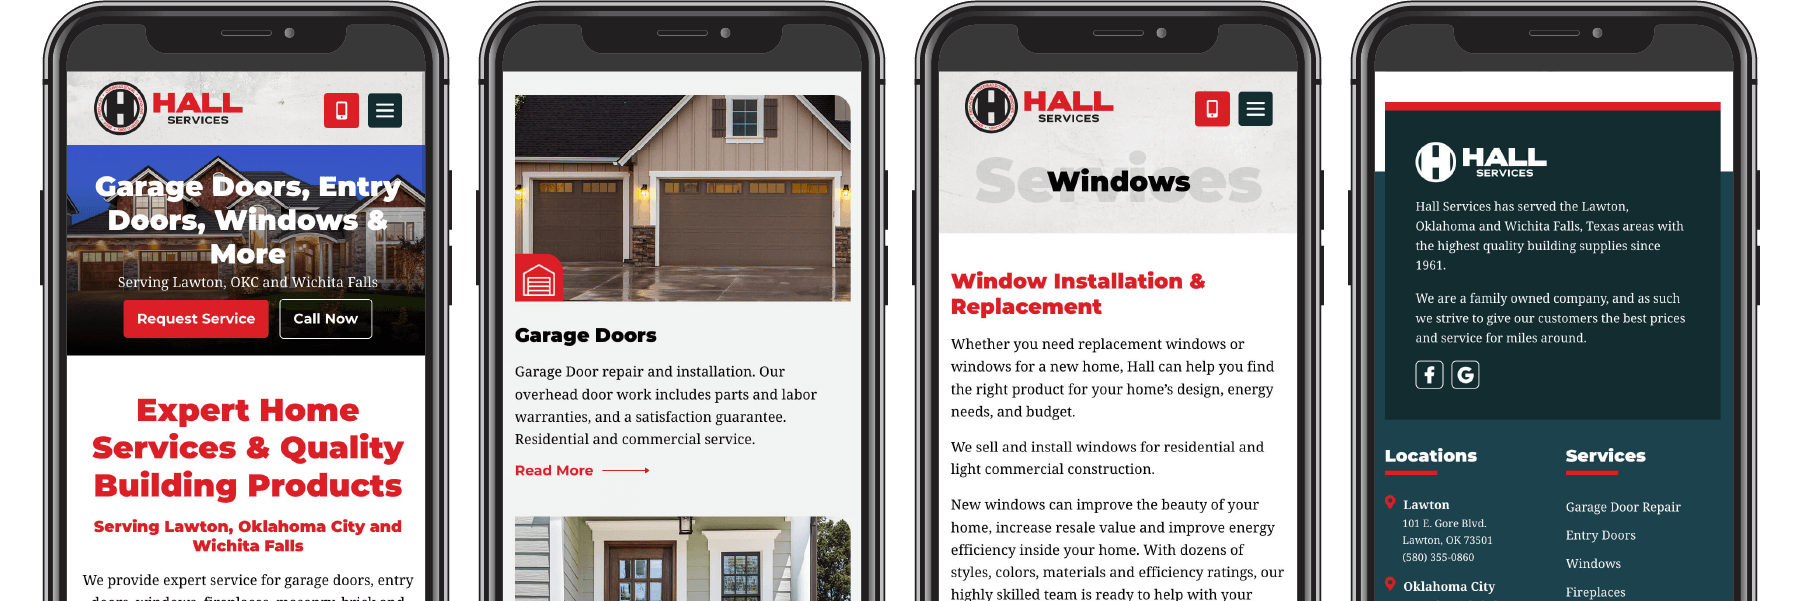 Four pages of the Hall Services website displayed on four phones.